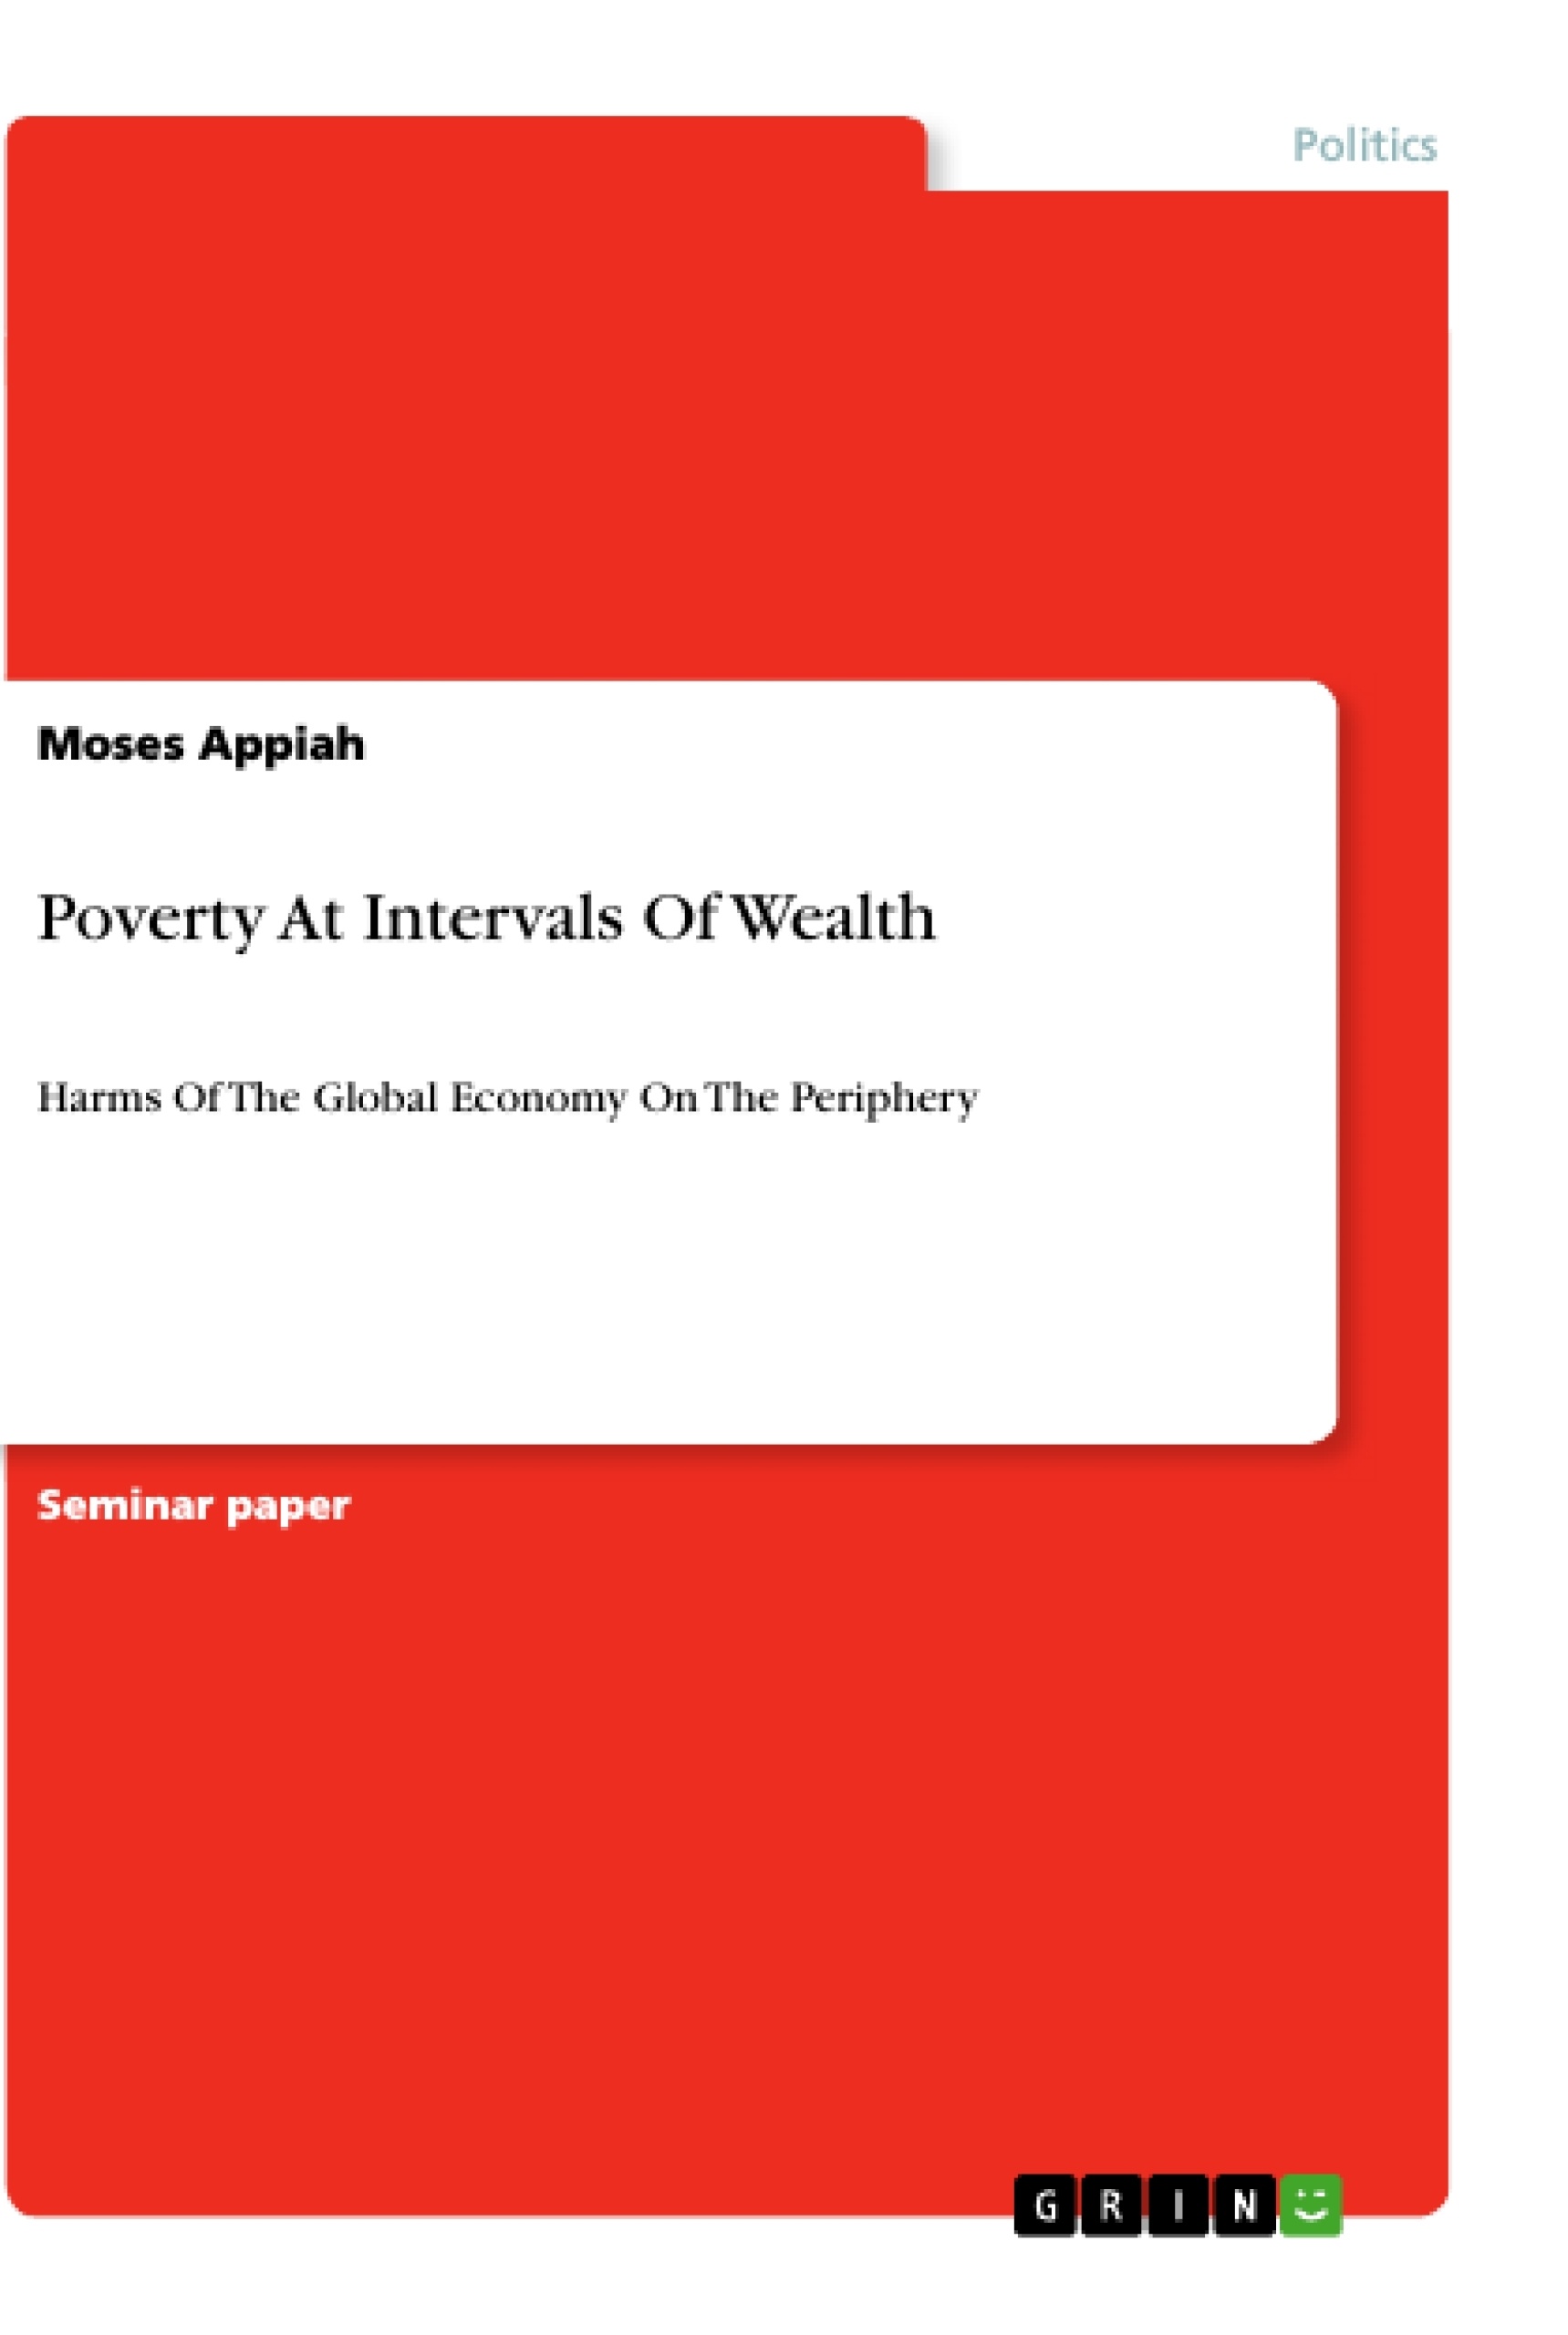 Titel: Poverty At Intervals Of Wealth